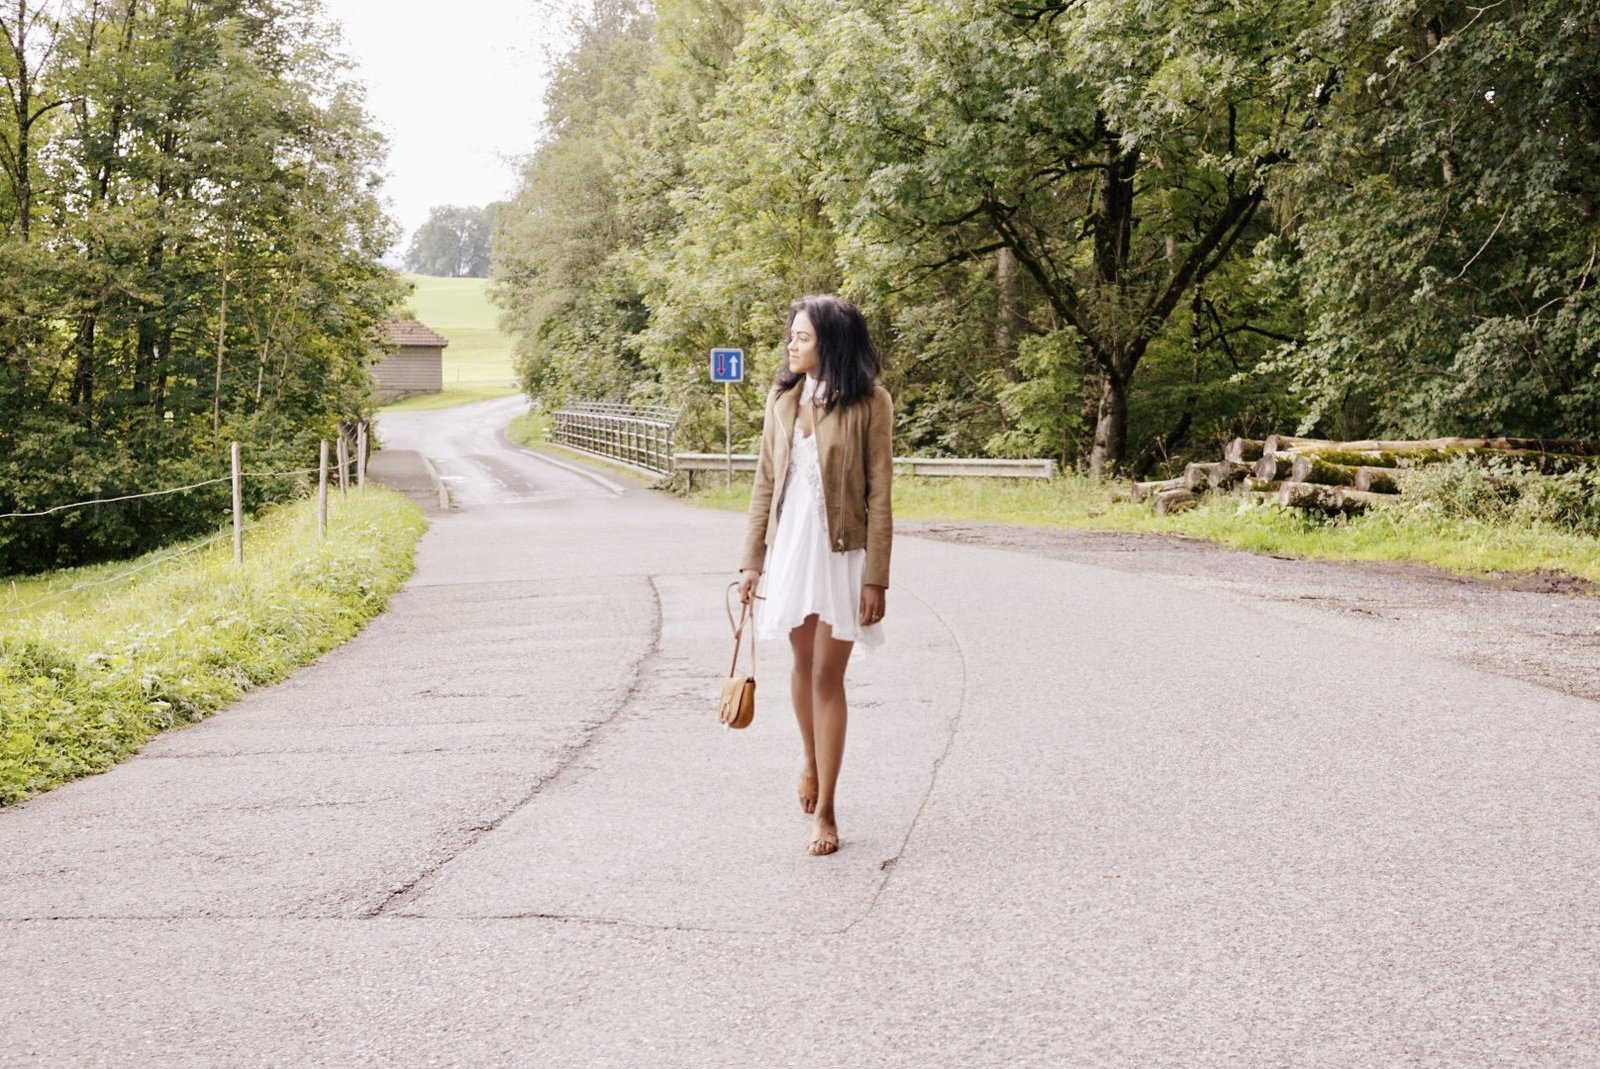 Sachini wearing a brown jacket and white dress on a country side road